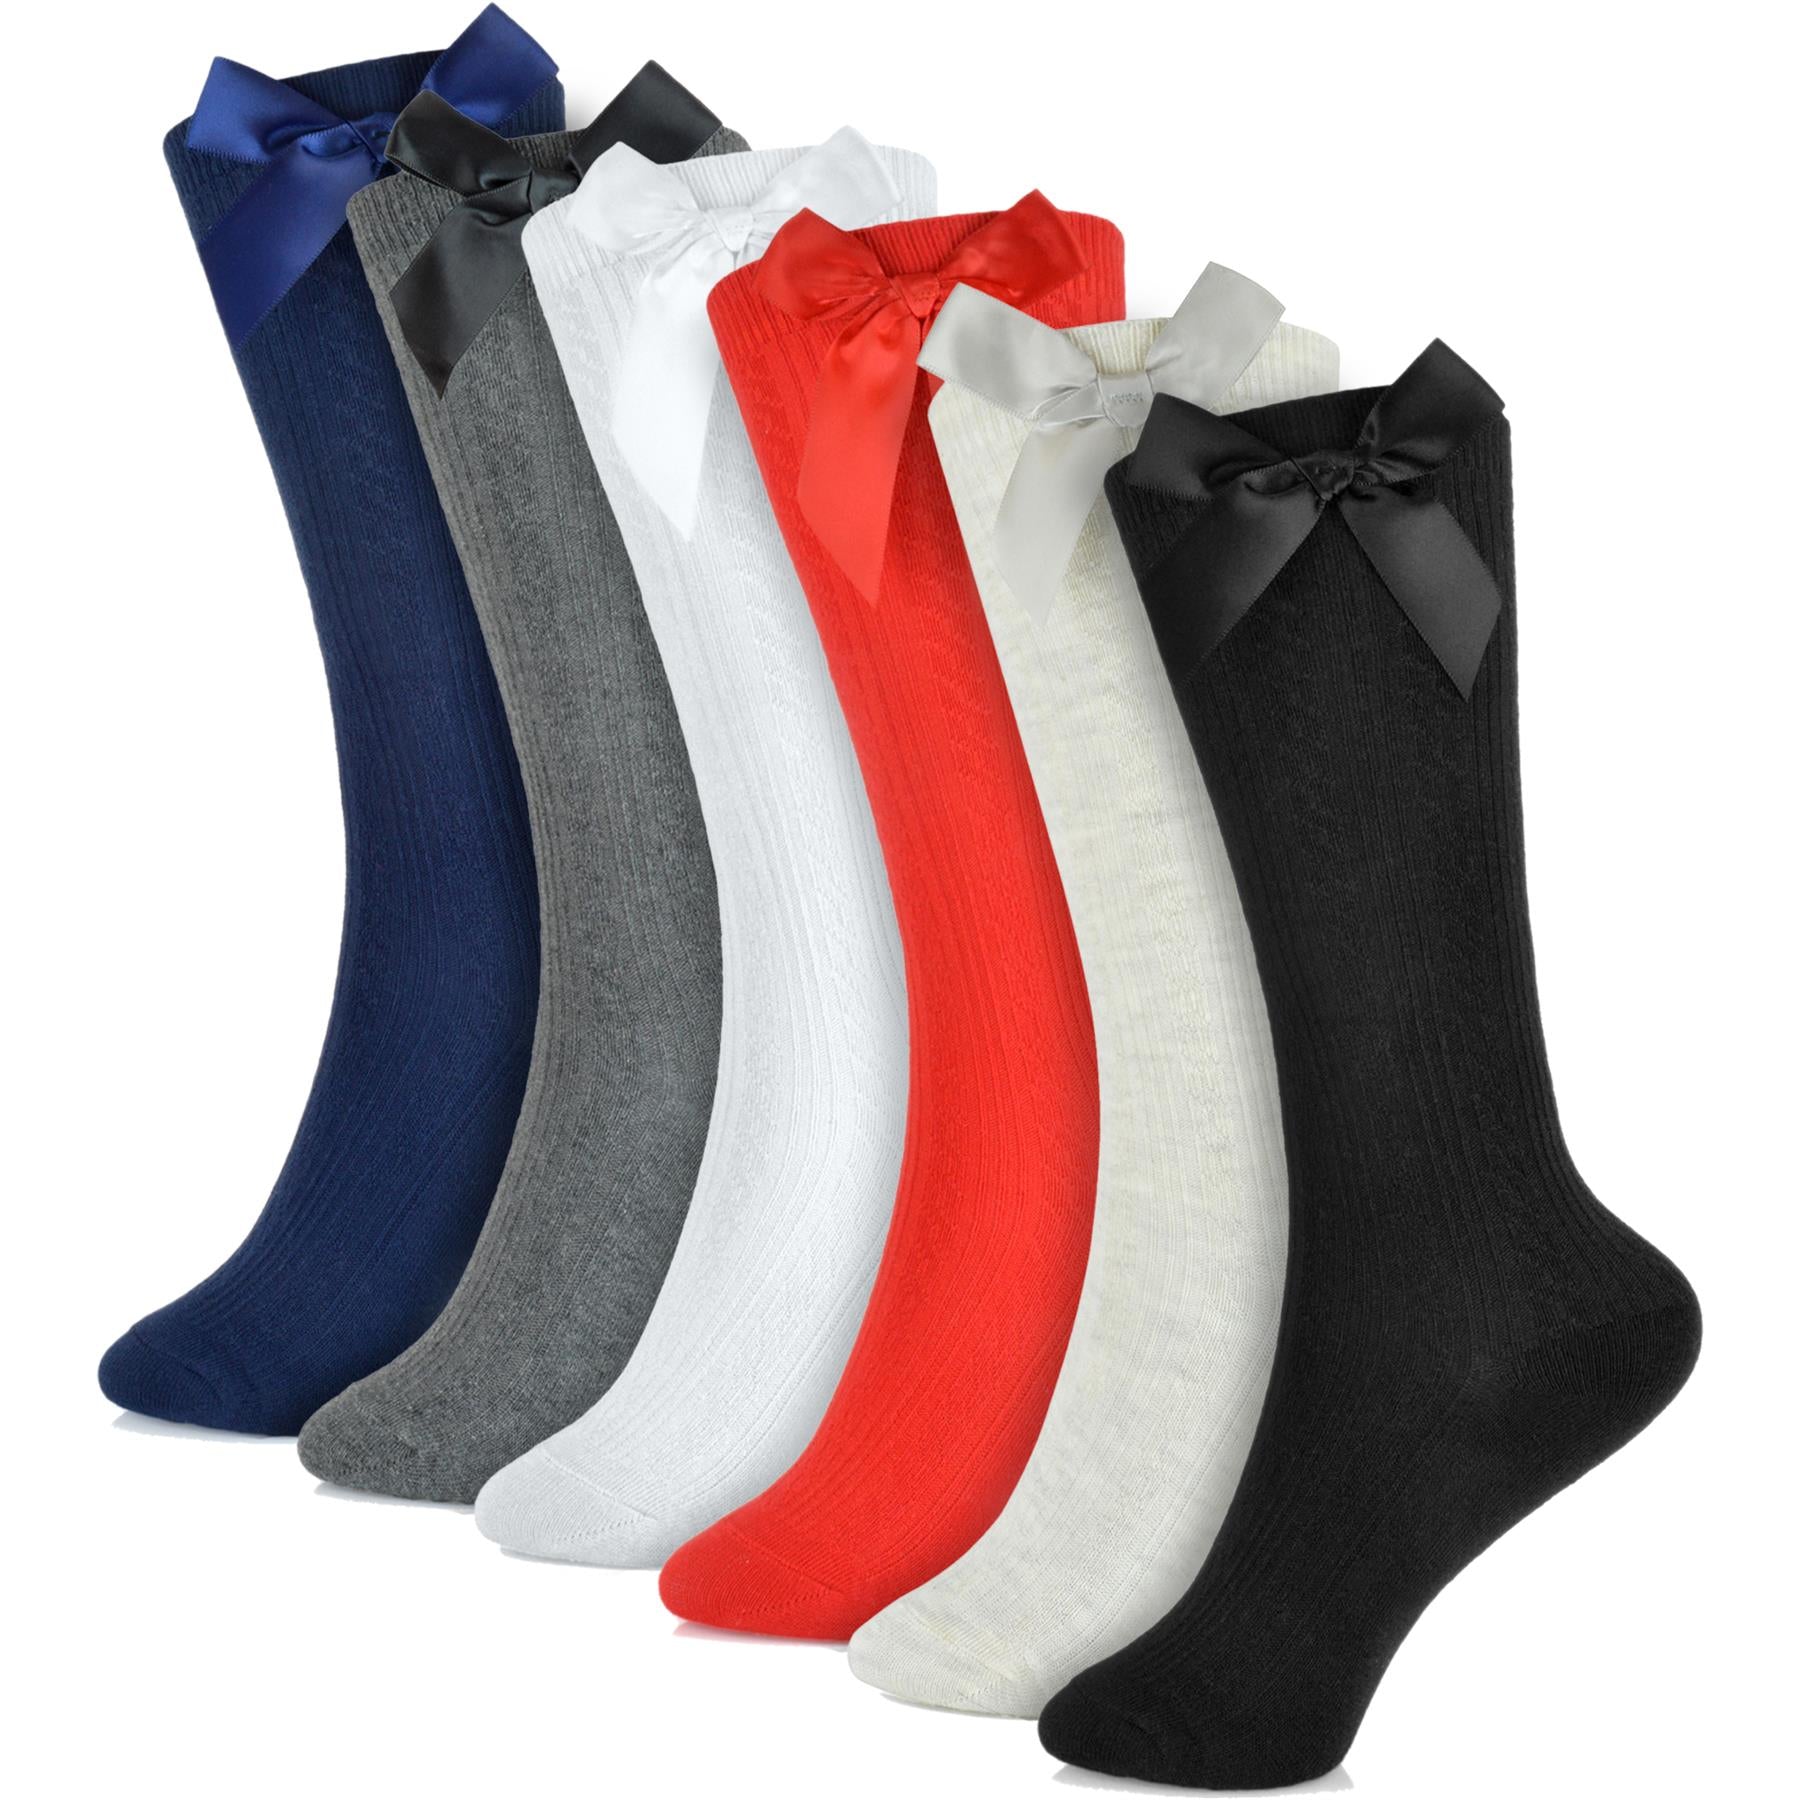 Kids Girls Cute Cozy Cotton Pack of 3 Knee High School Parties Socks with Bow